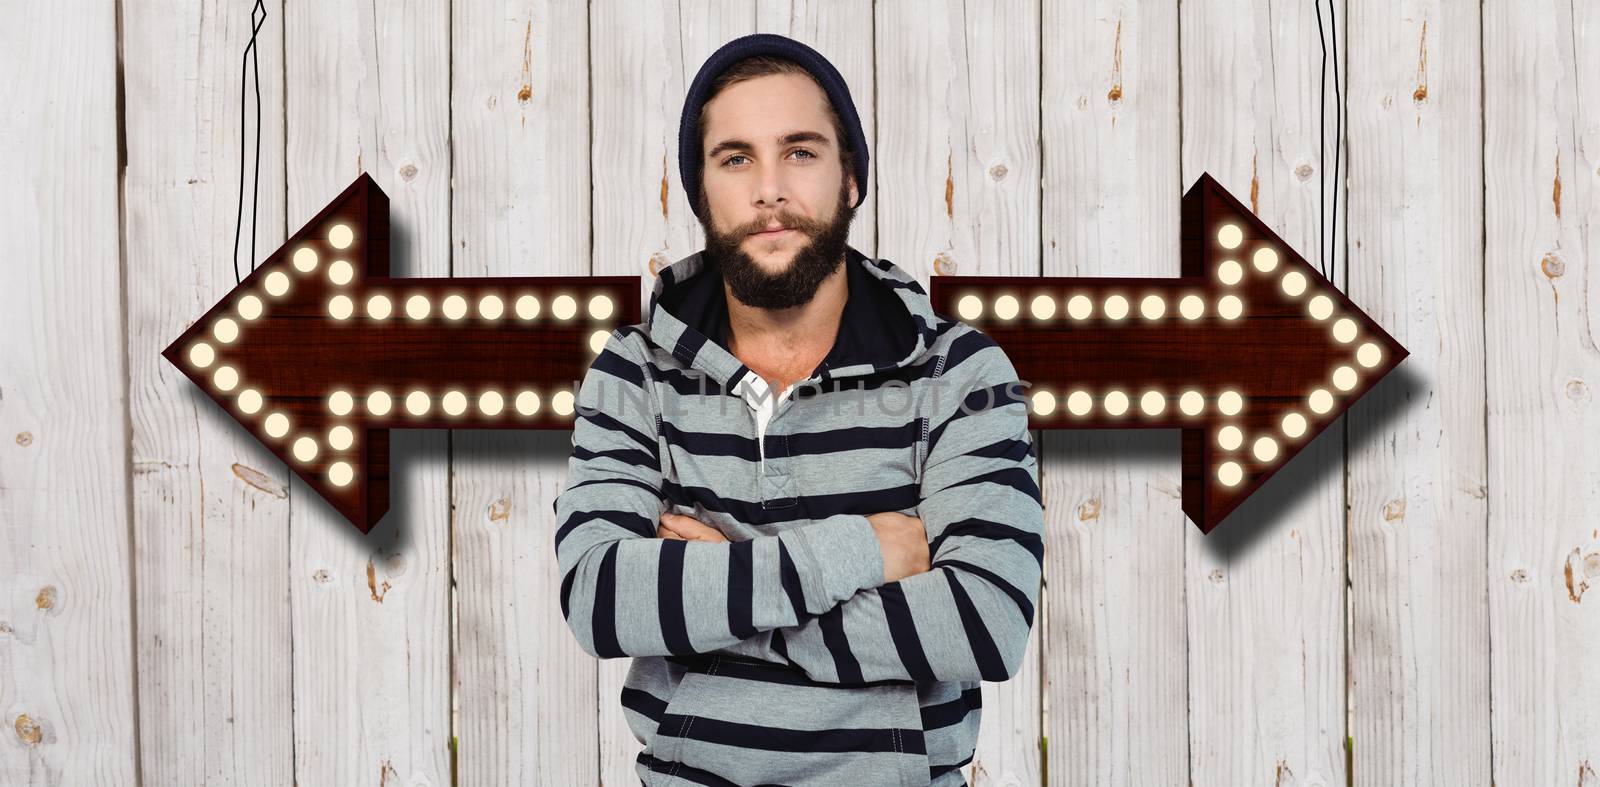 Portrait of hipster with hooded shirt against wooden background